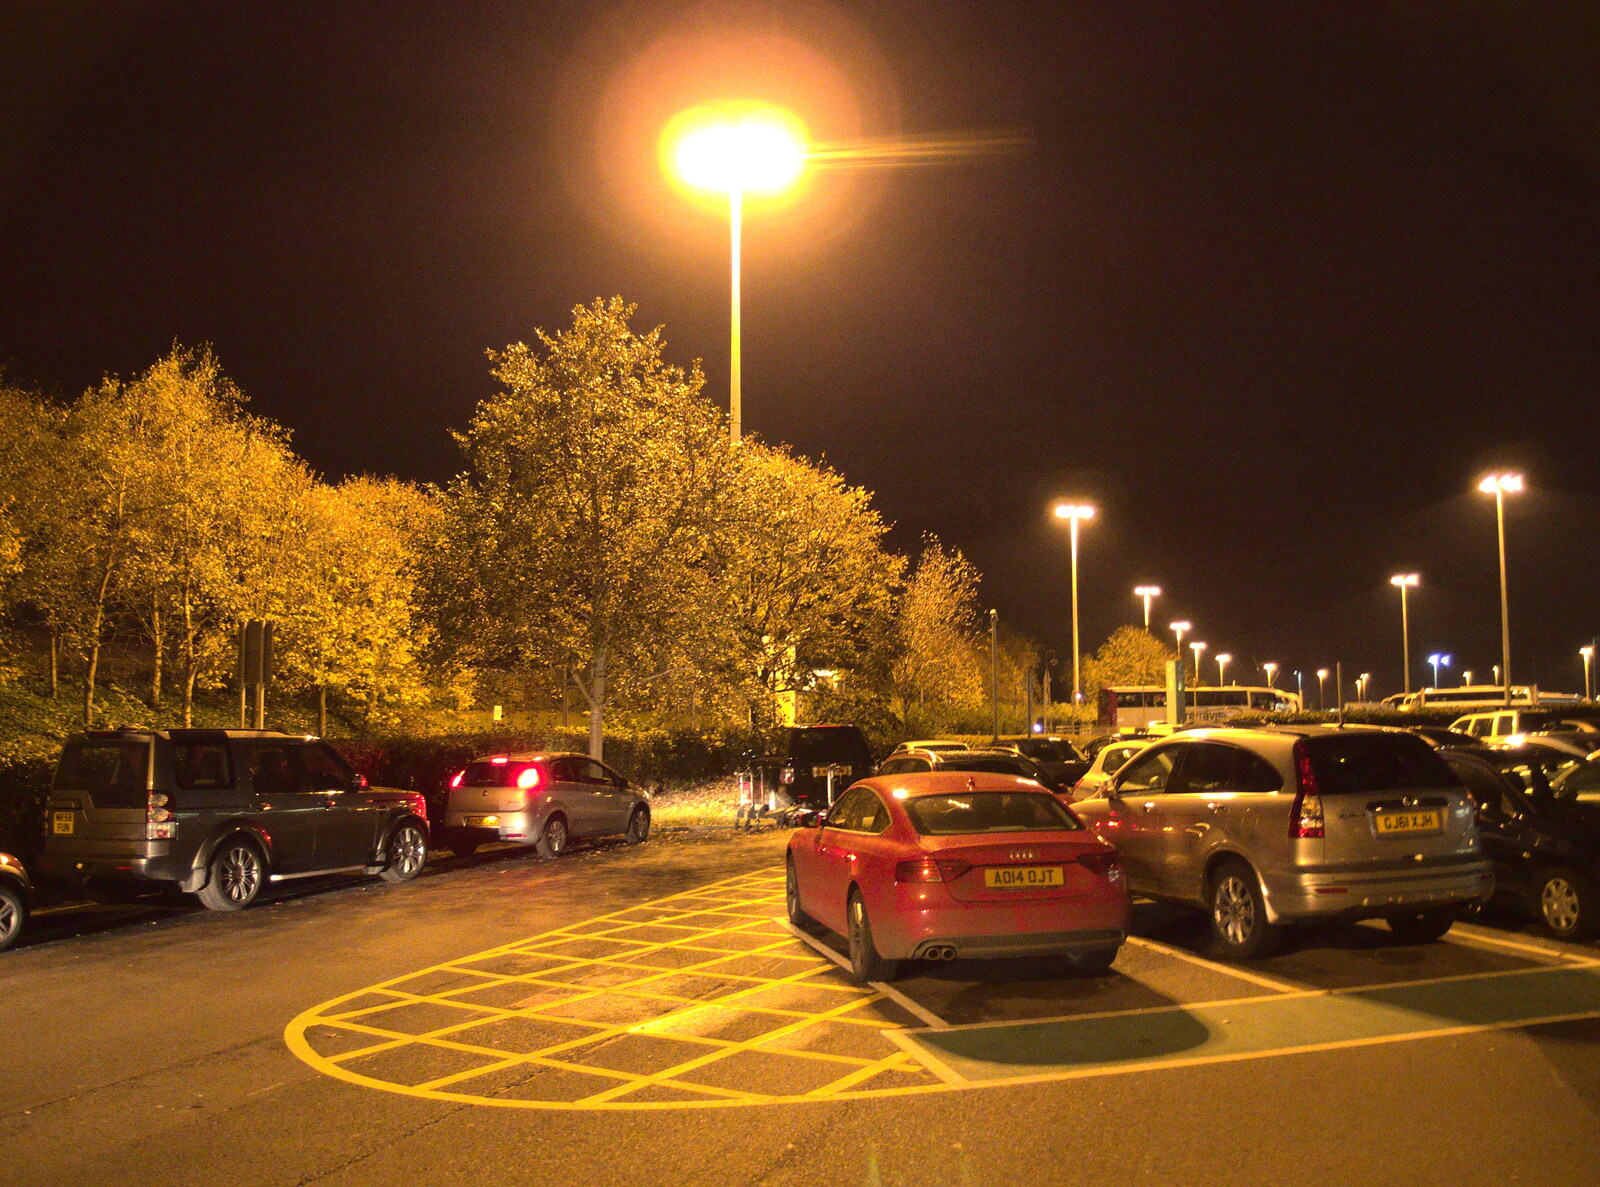 Sodium lights of the short-stay car park from A Saturday in Town, Diss, Norfolk - 8th November 2014